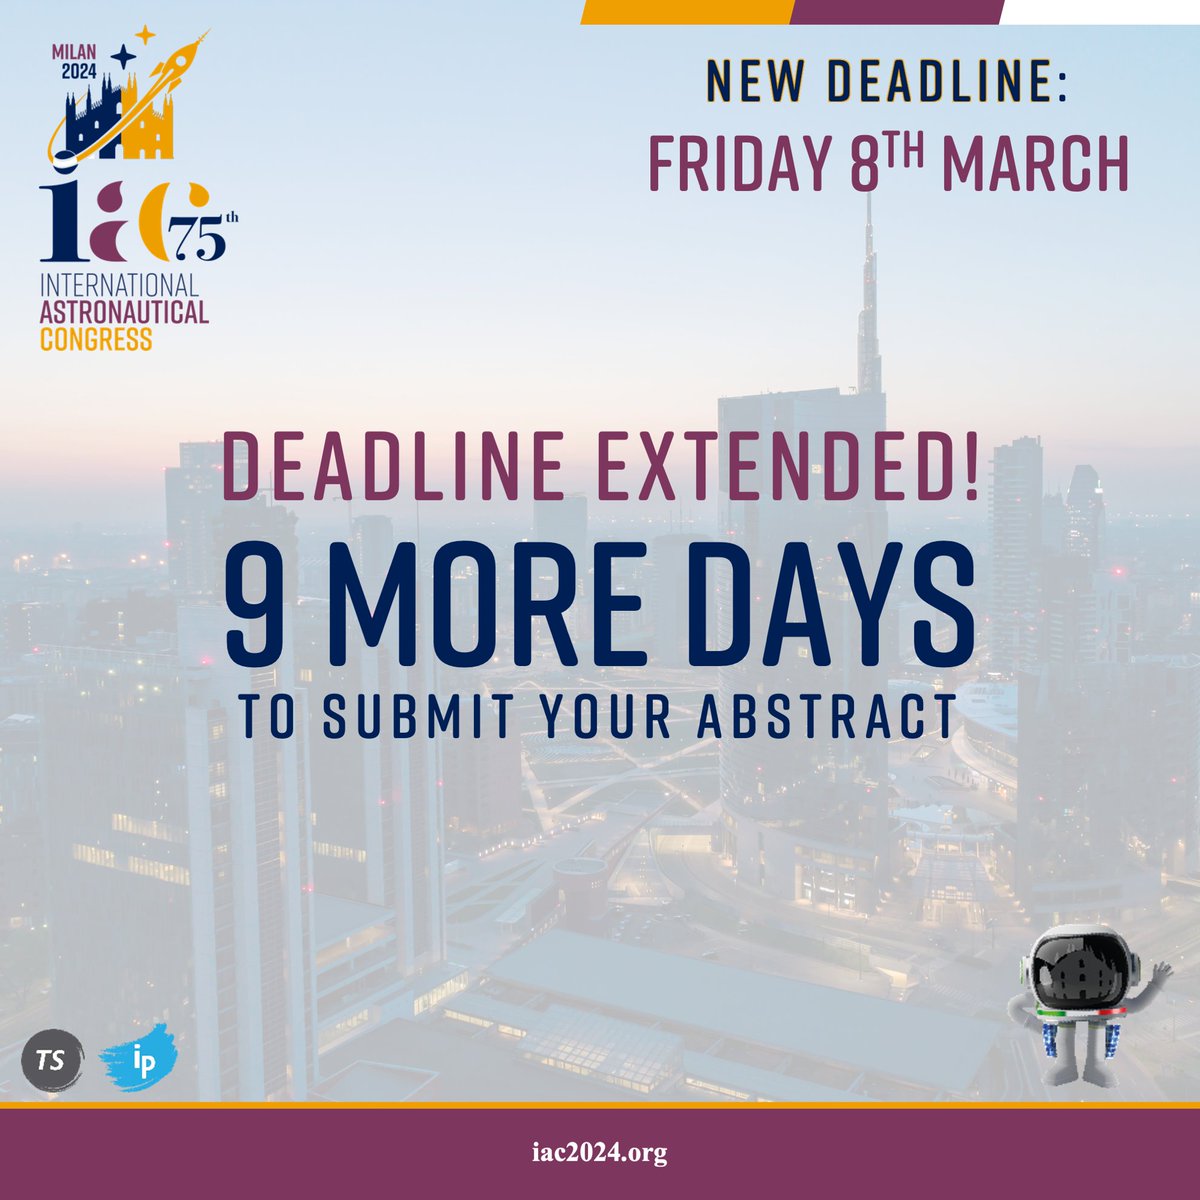 Great news! The deadline for the submission of your IAC 2024 abstract has been extended! 📆 Submit by Friday 8th March, via the IAF portal at iafastro.directory/iac/account/lo… @iafastro @aidaaitaly @ASI_spazio @Leonardo_live @telespazio